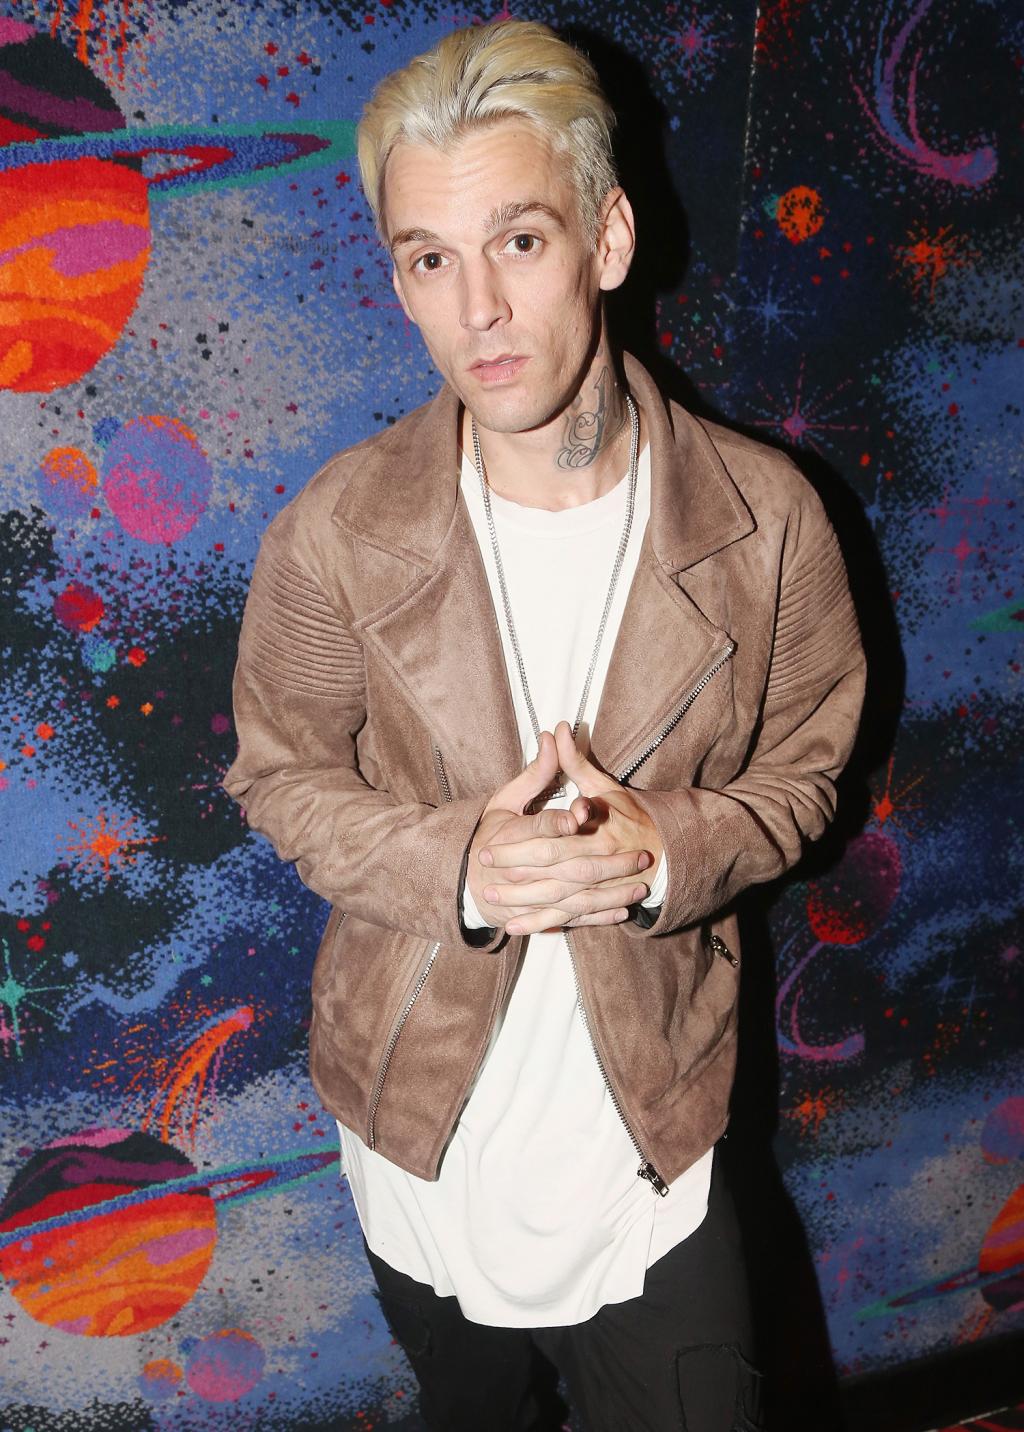 Aaron Carter Reveals He Is Attracted to Men and Women in Emotional Letter to Fans: â€˜This Doesnâ€™t Bring MeÂ Shameâ€™